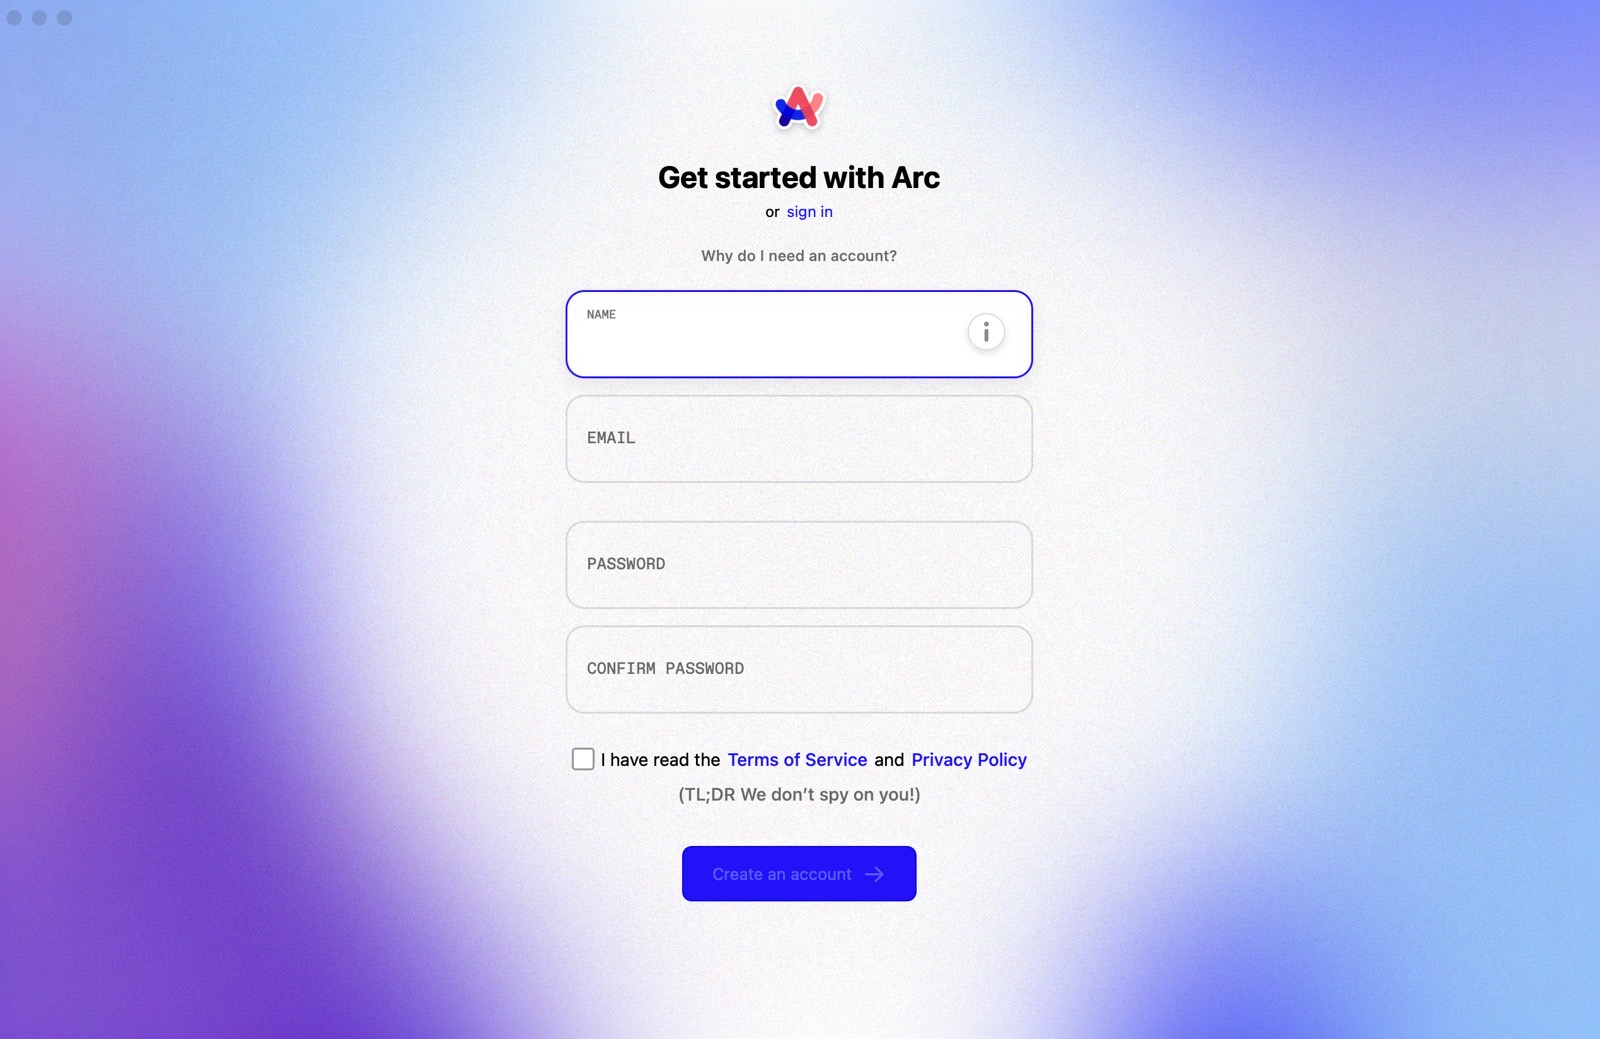 Don't have an Arc account? You can create one before you use the browser.